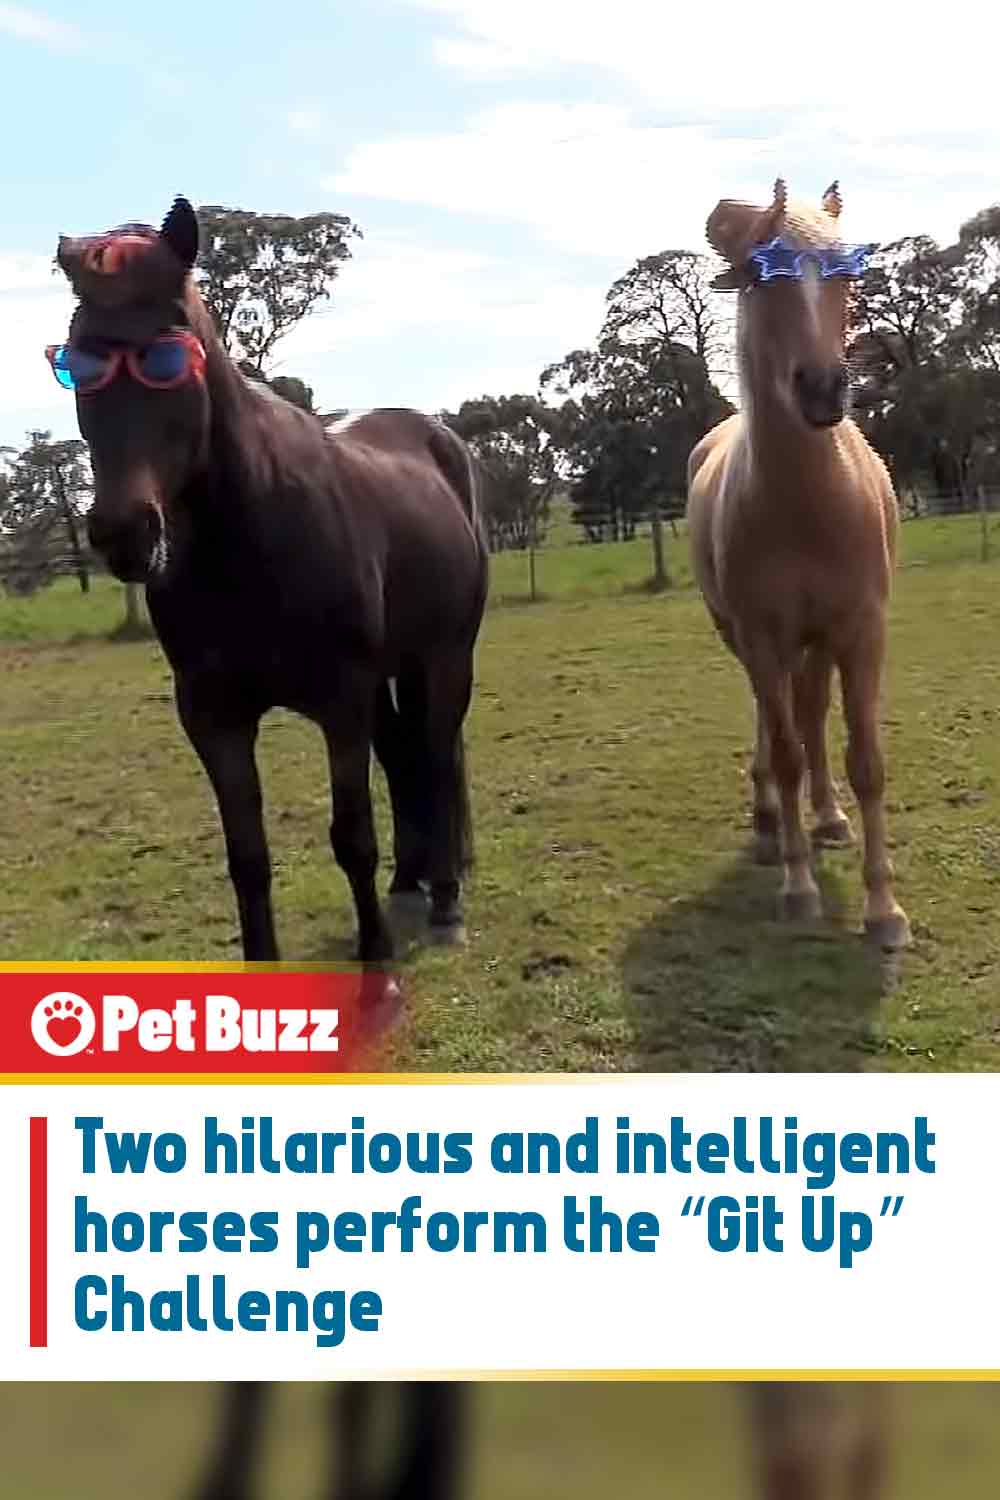 Two hilarious and intelligent horses perform the “Git Up” Challenge